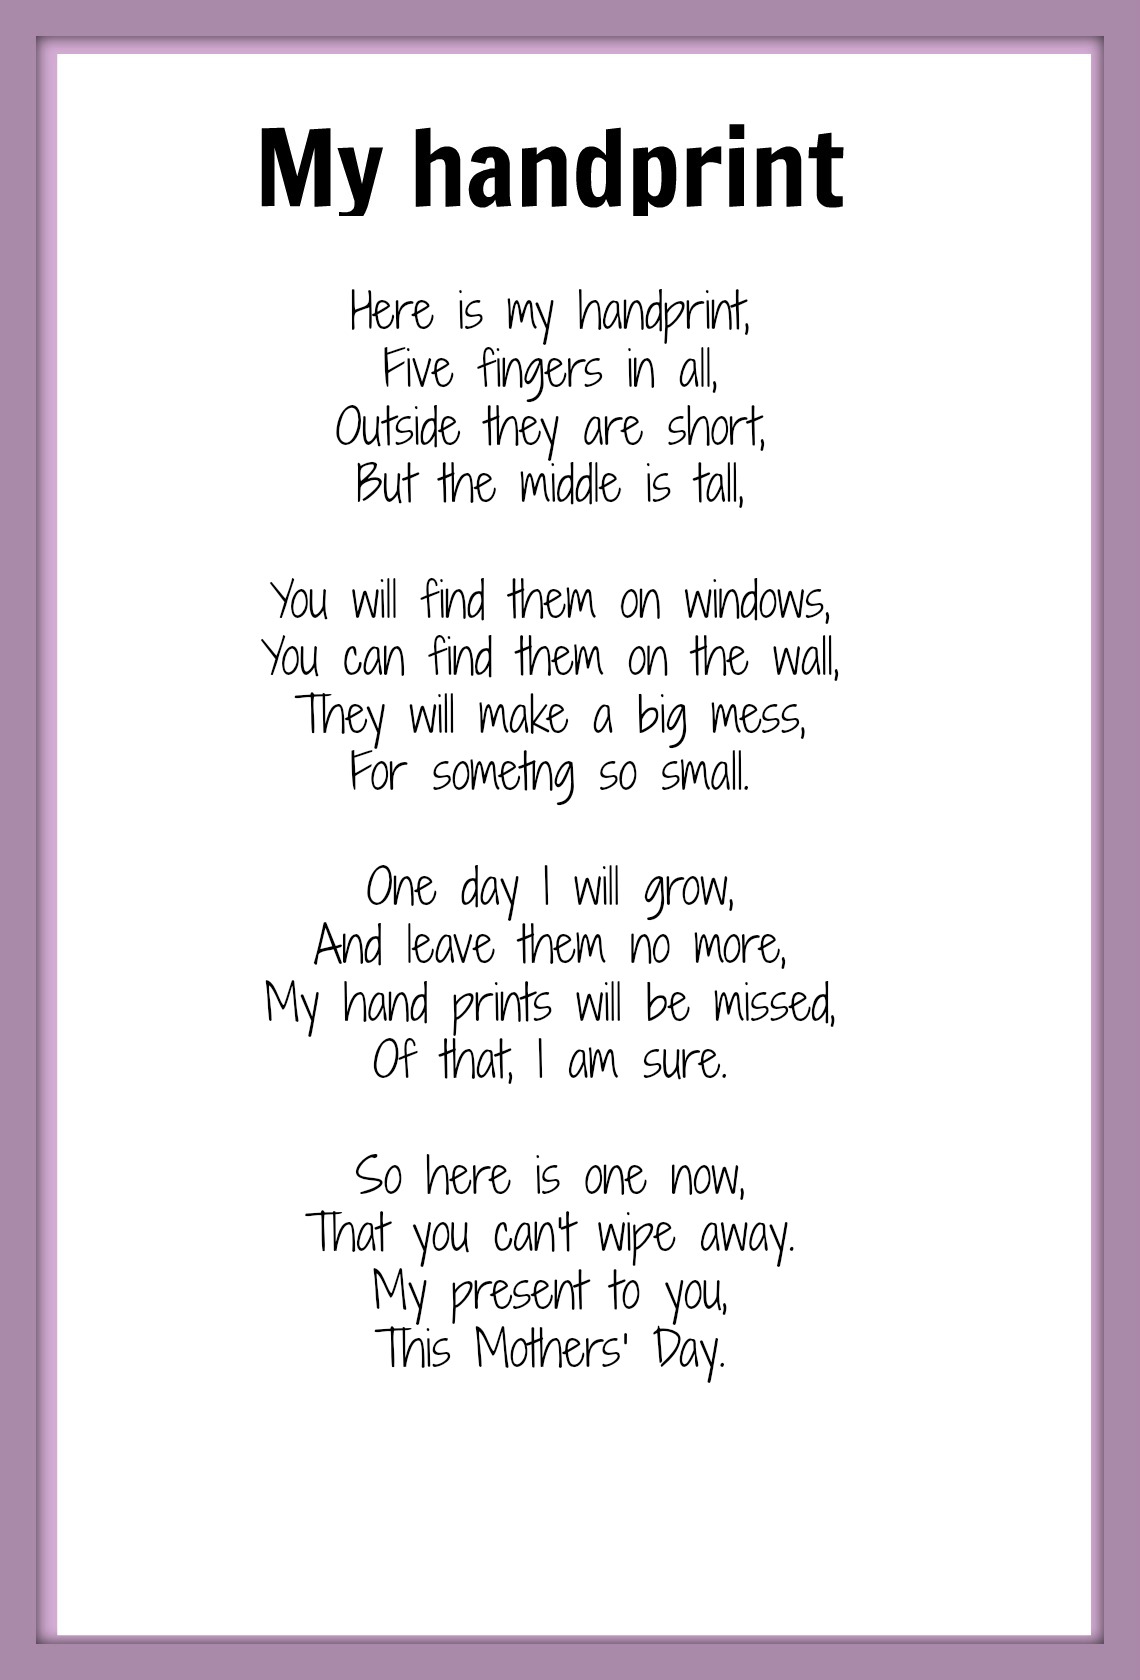 Mothers Day Poem Printable